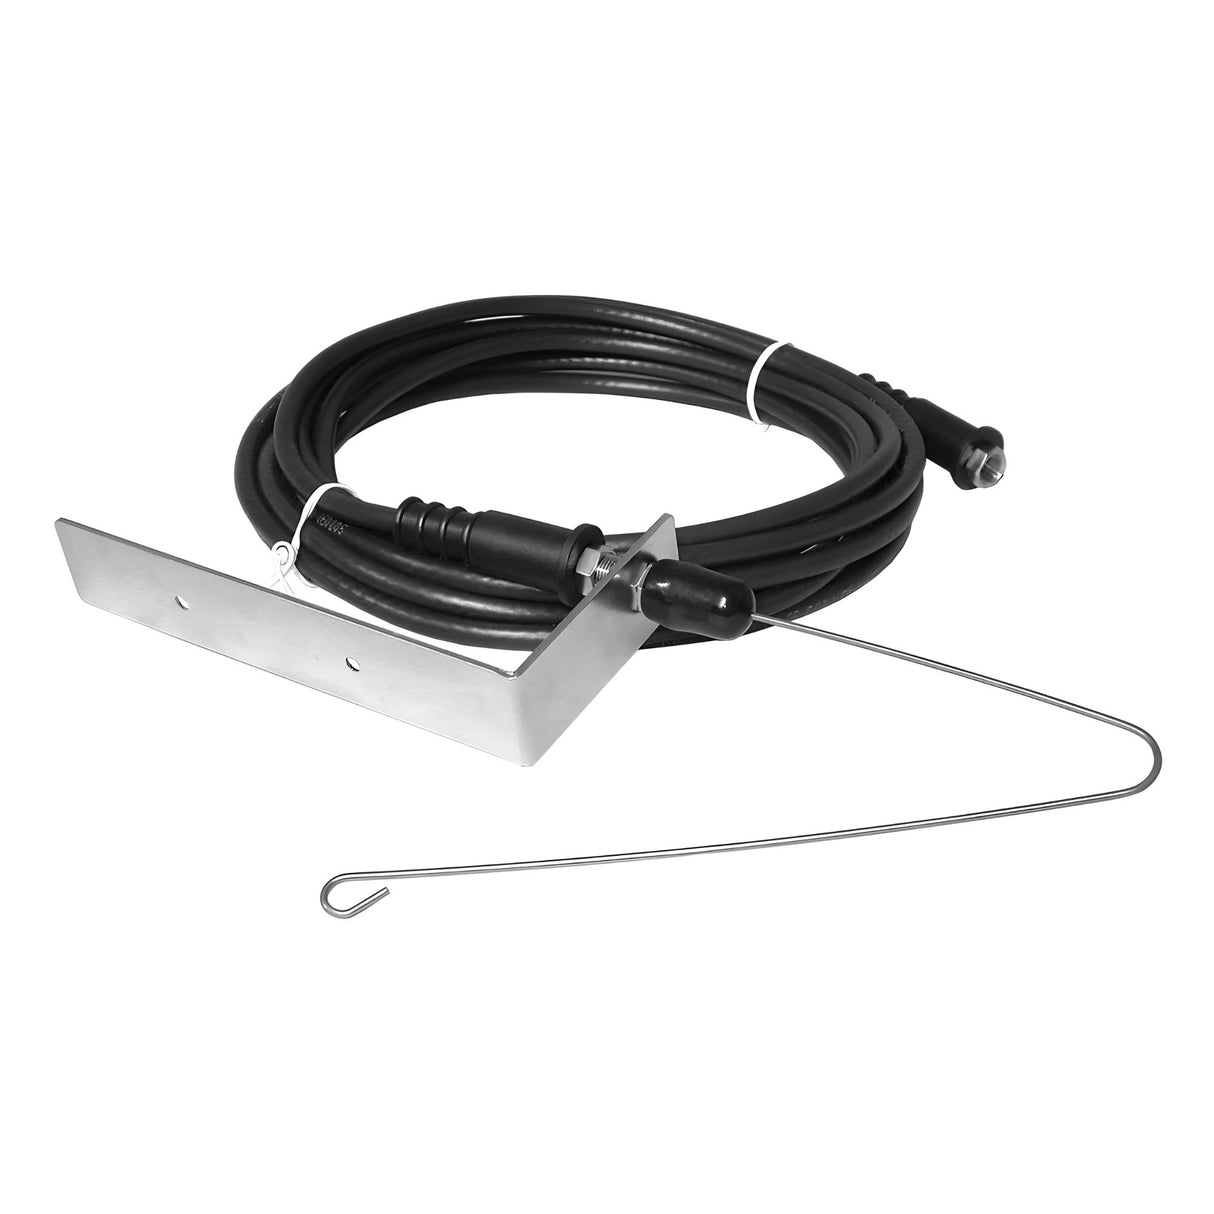 HySecurity MX001179 Antenna and Coax Cable